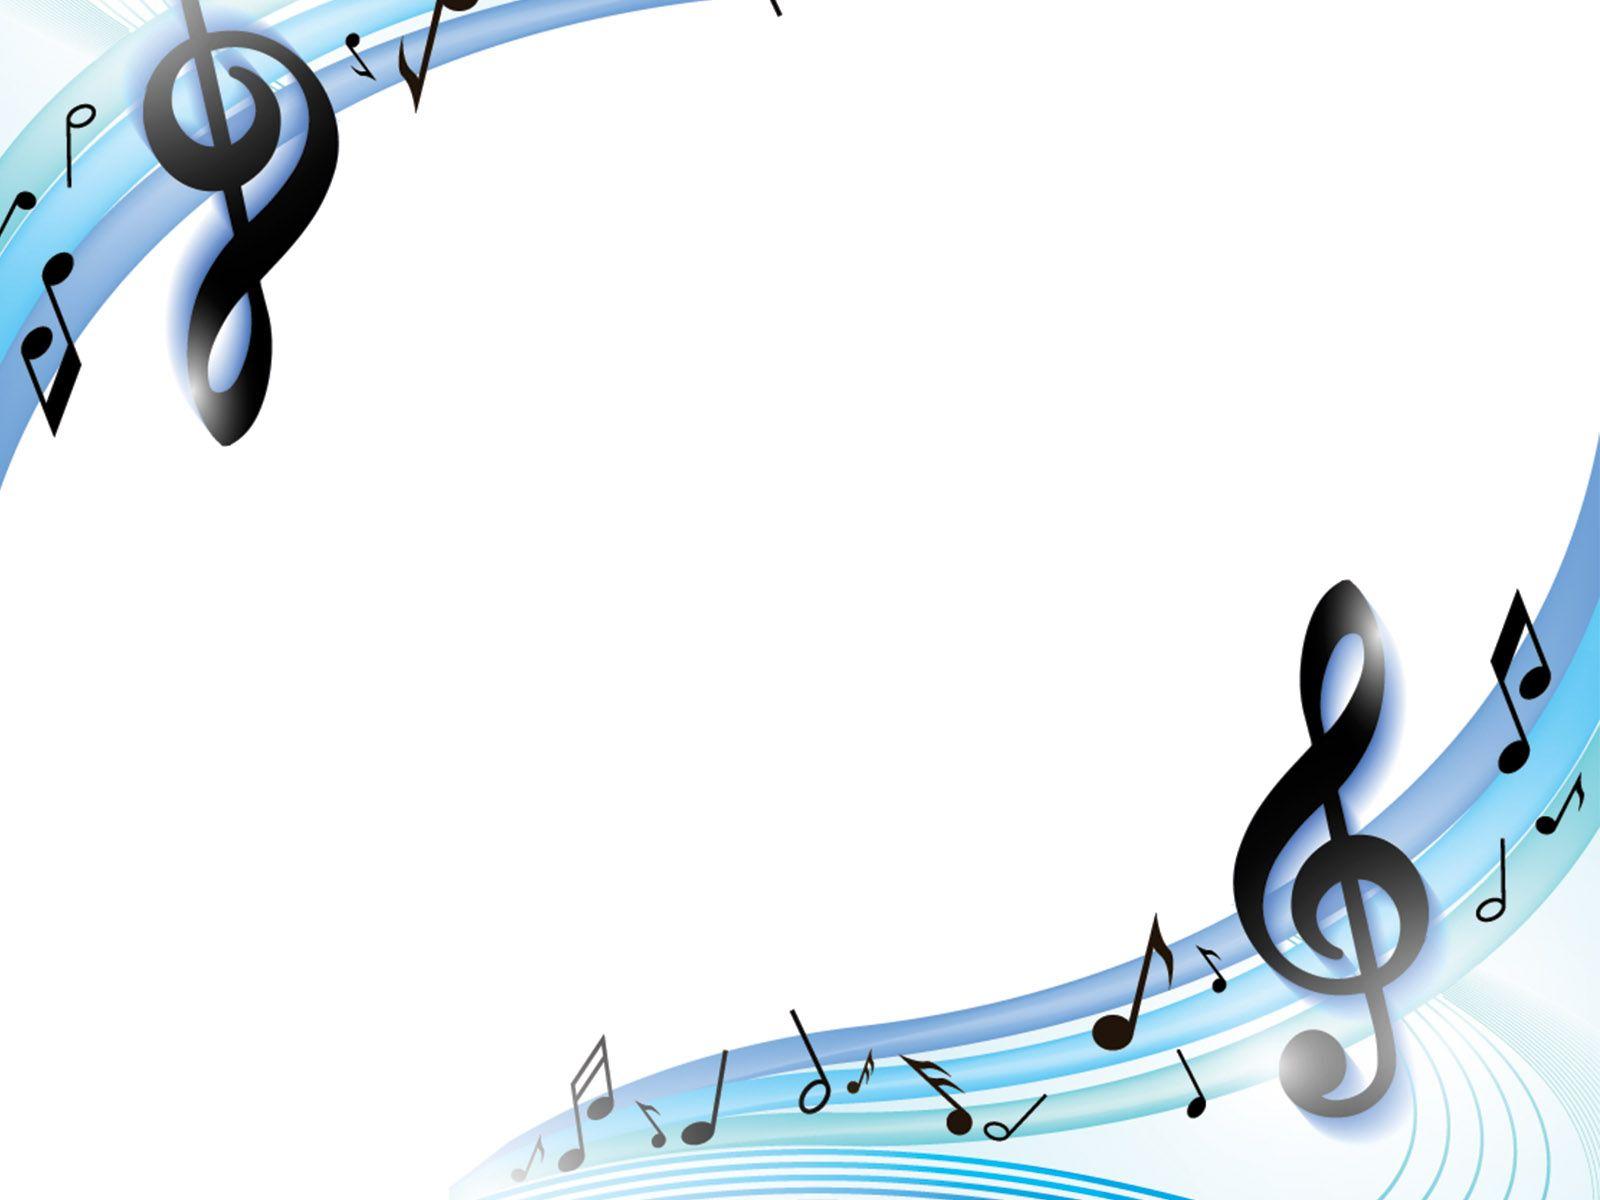 soft background music download